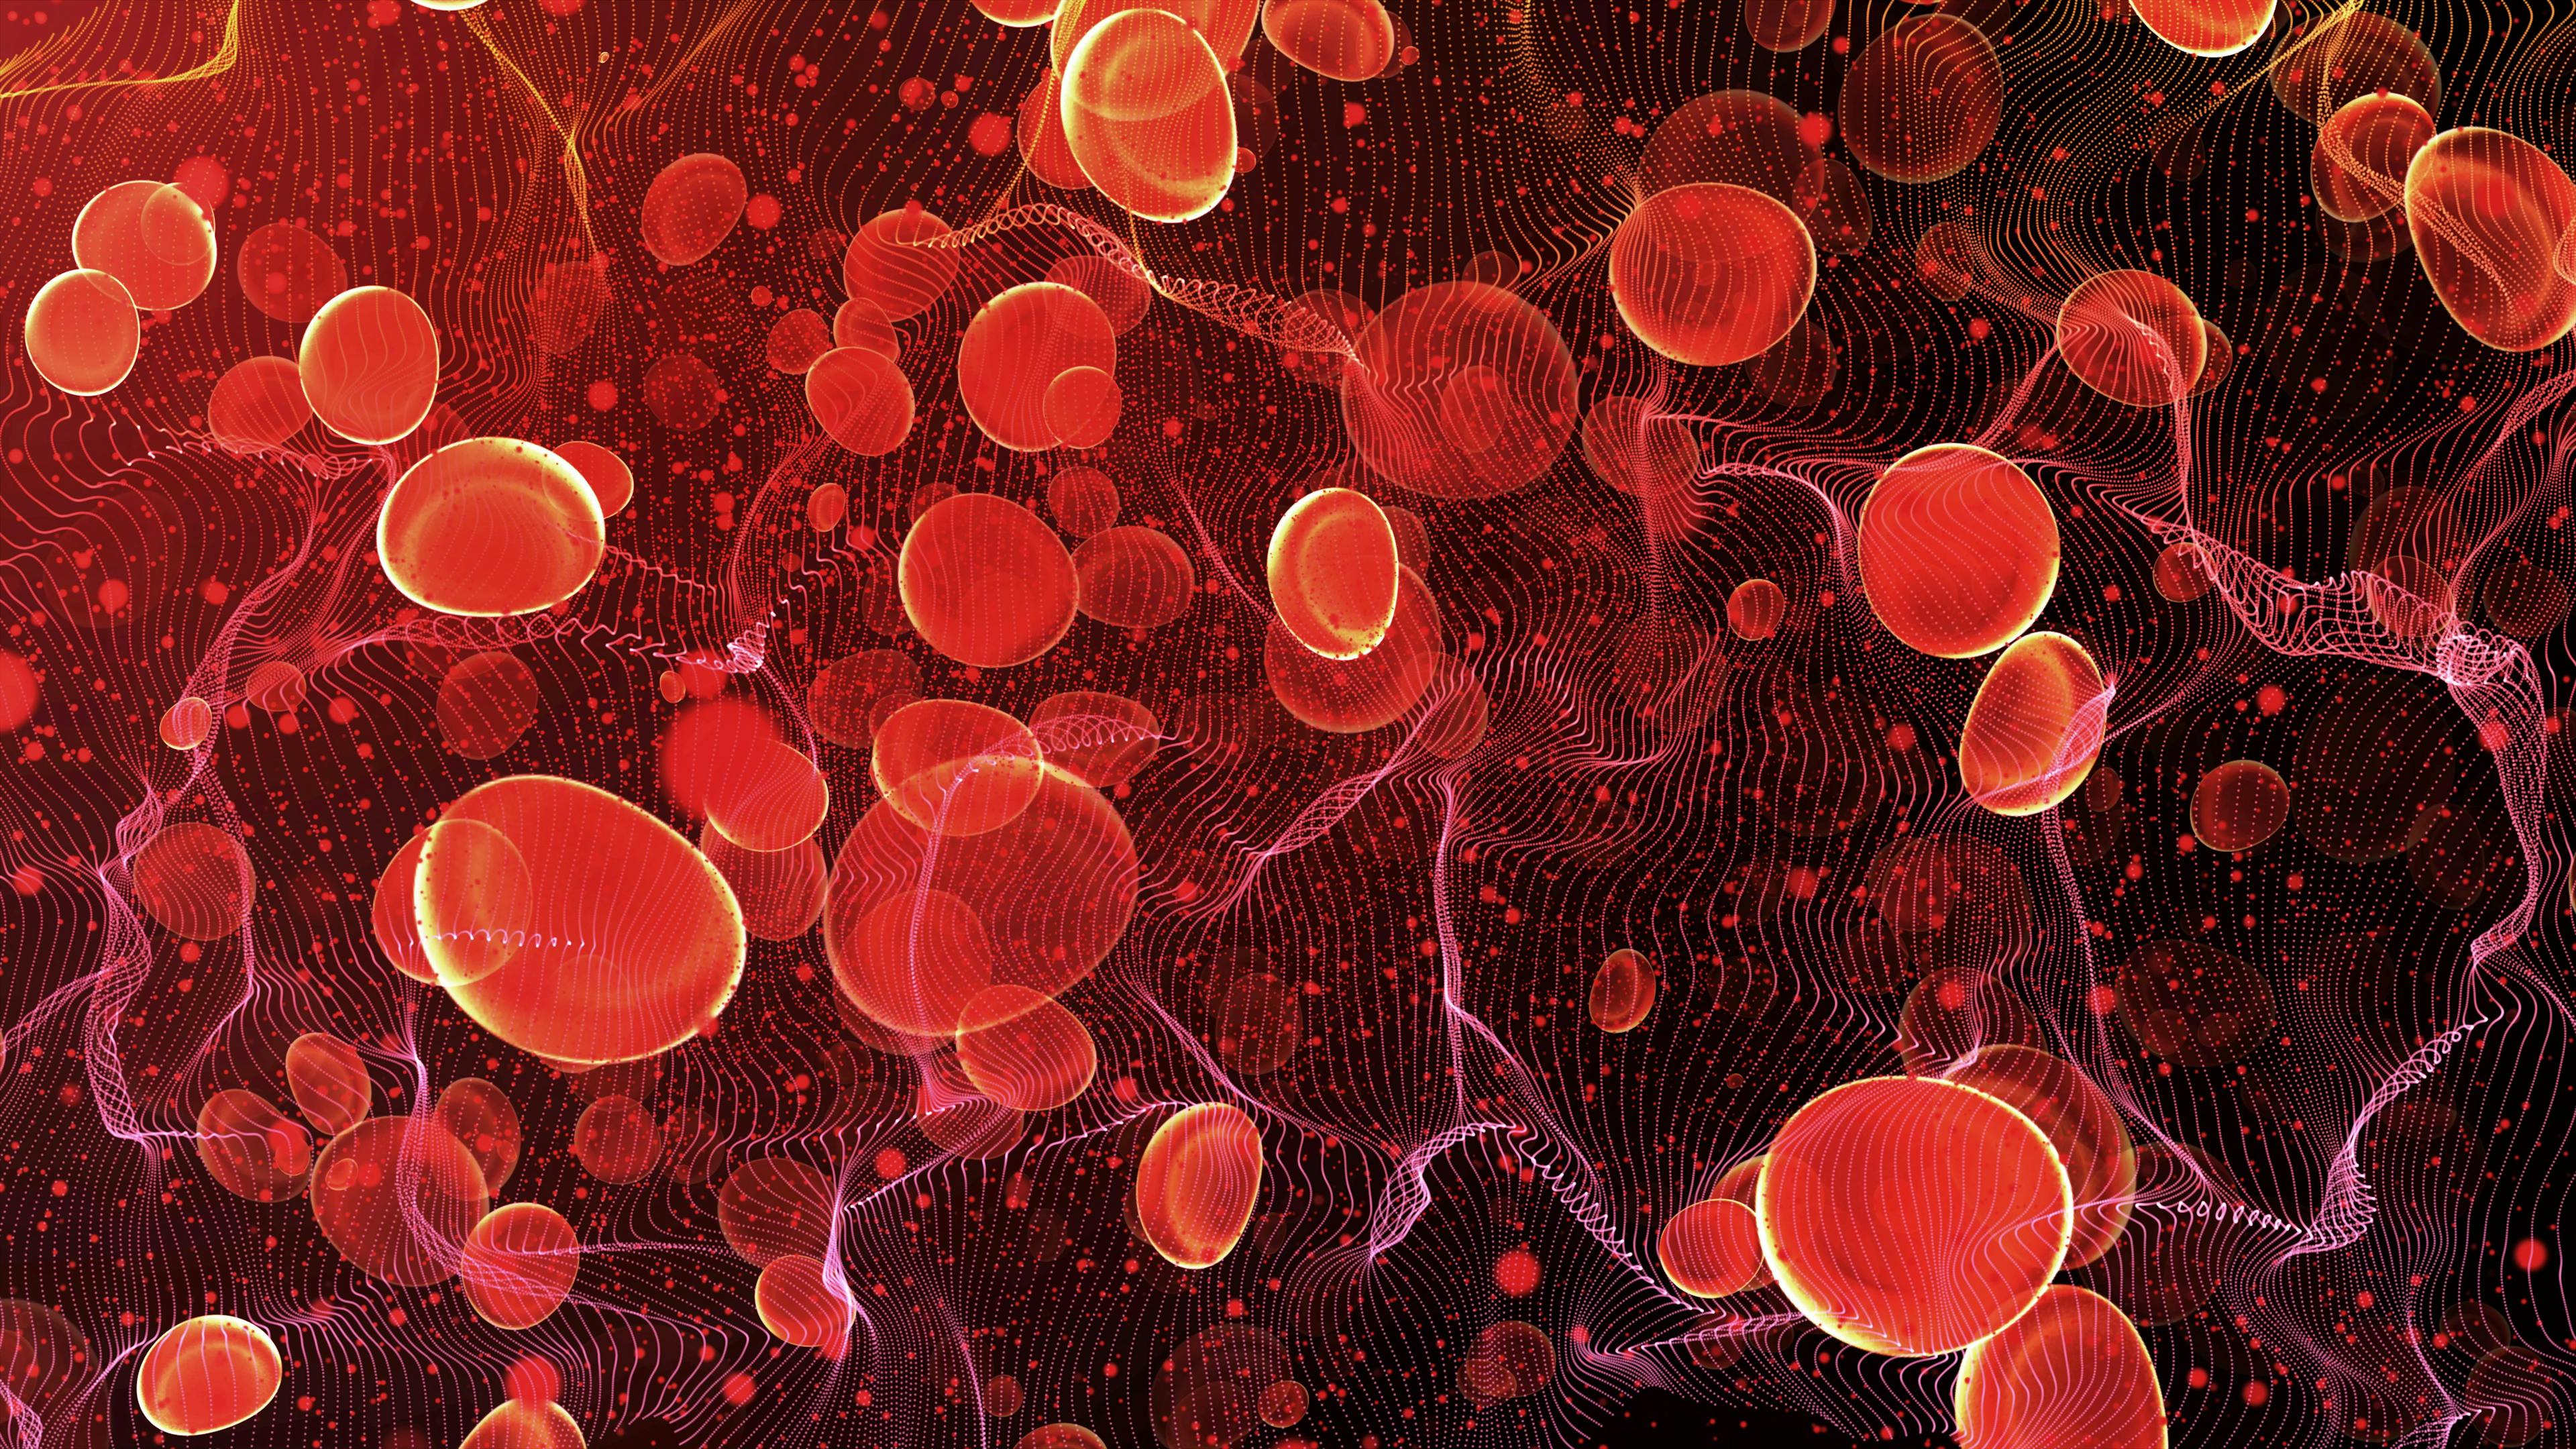 Red blood cells travel in an artery. Human body biotechnology science and health care concept. | Image Credit: DIgilife - stock.adobe.com